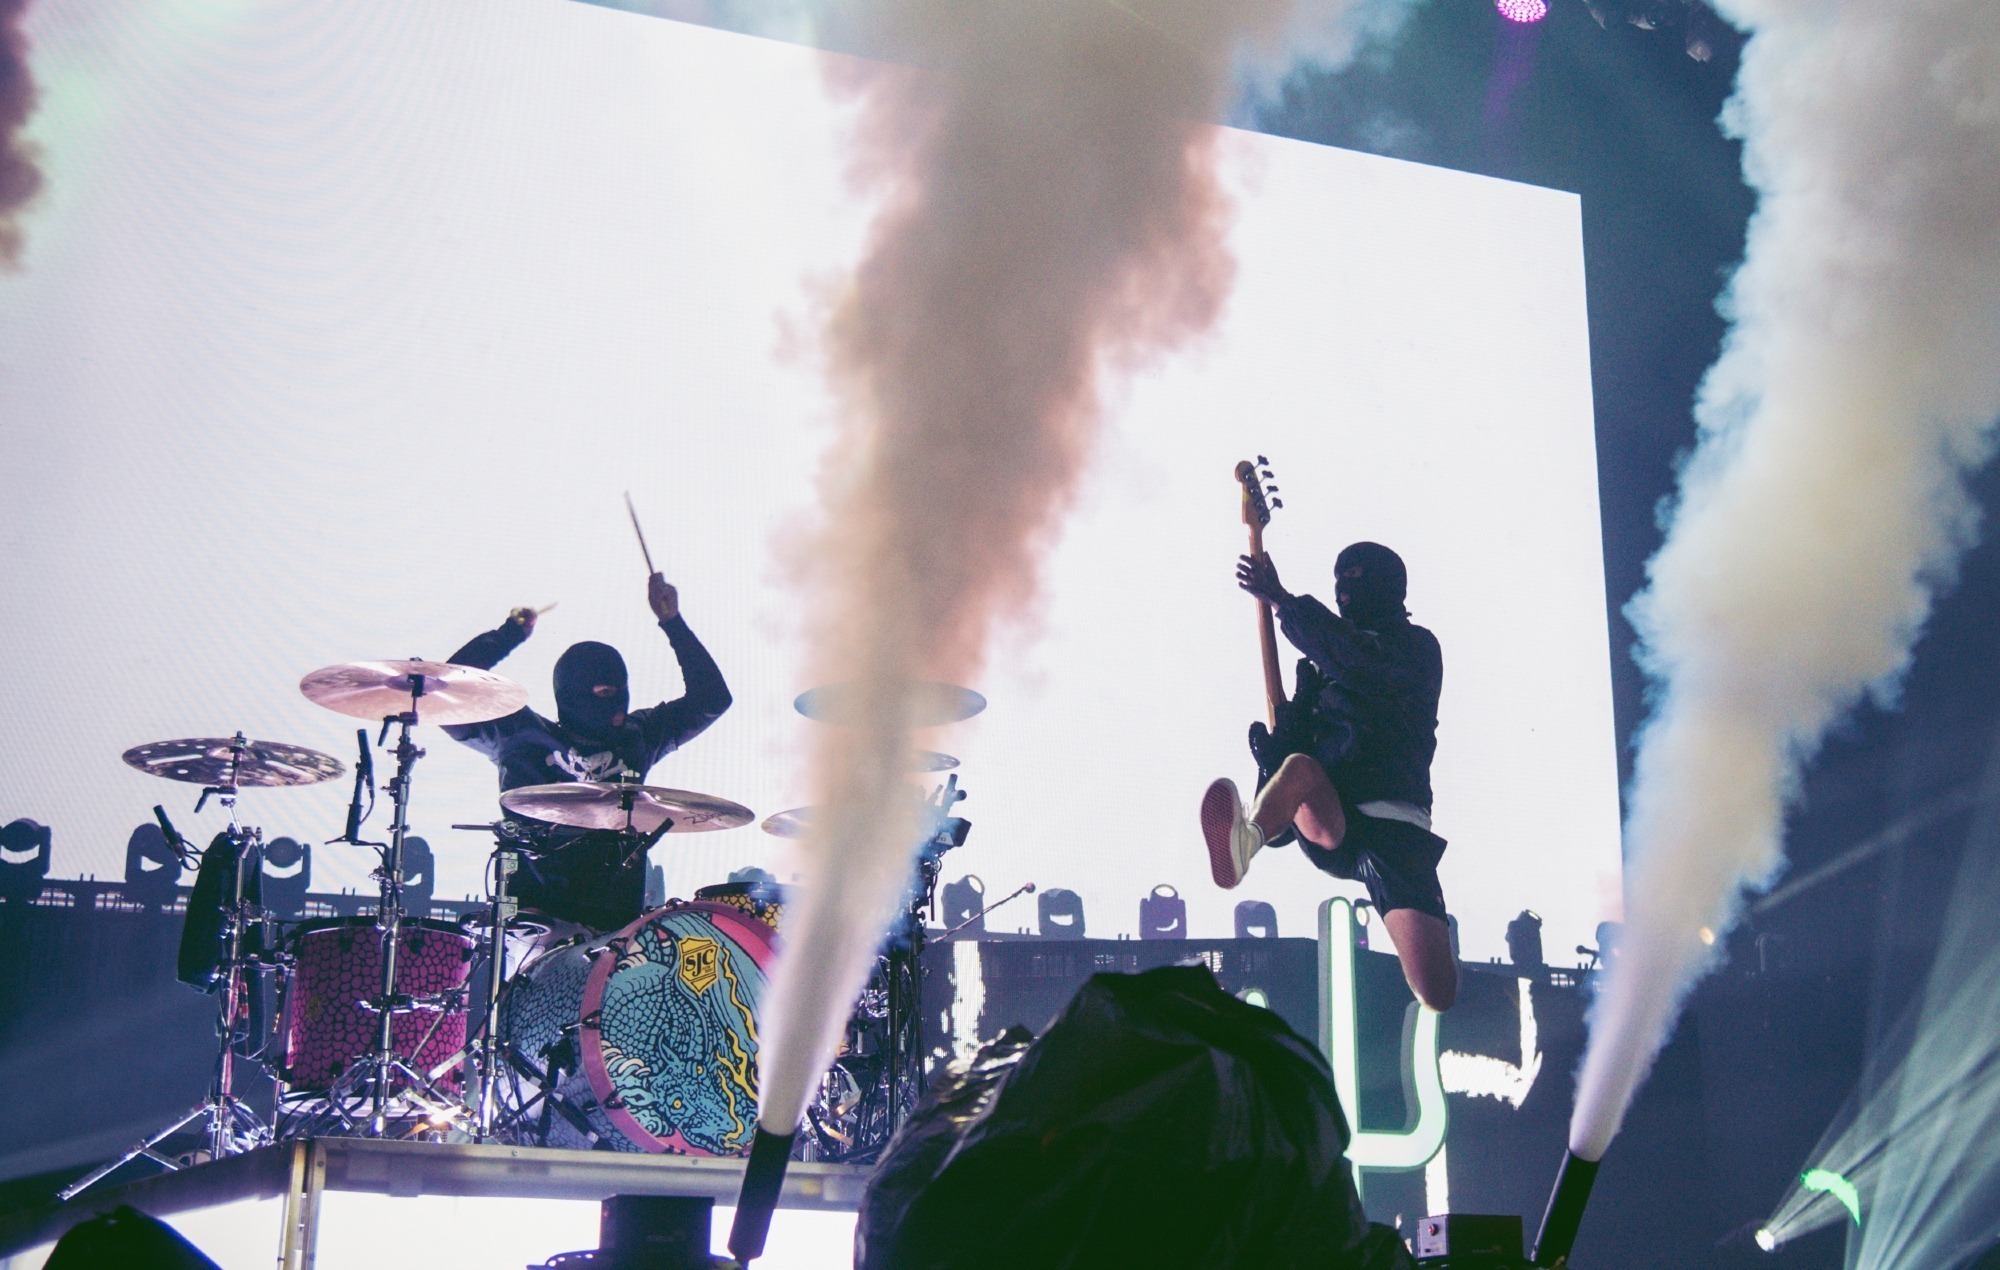 Twenty One Pilots say they “belong” at the top of festival bills